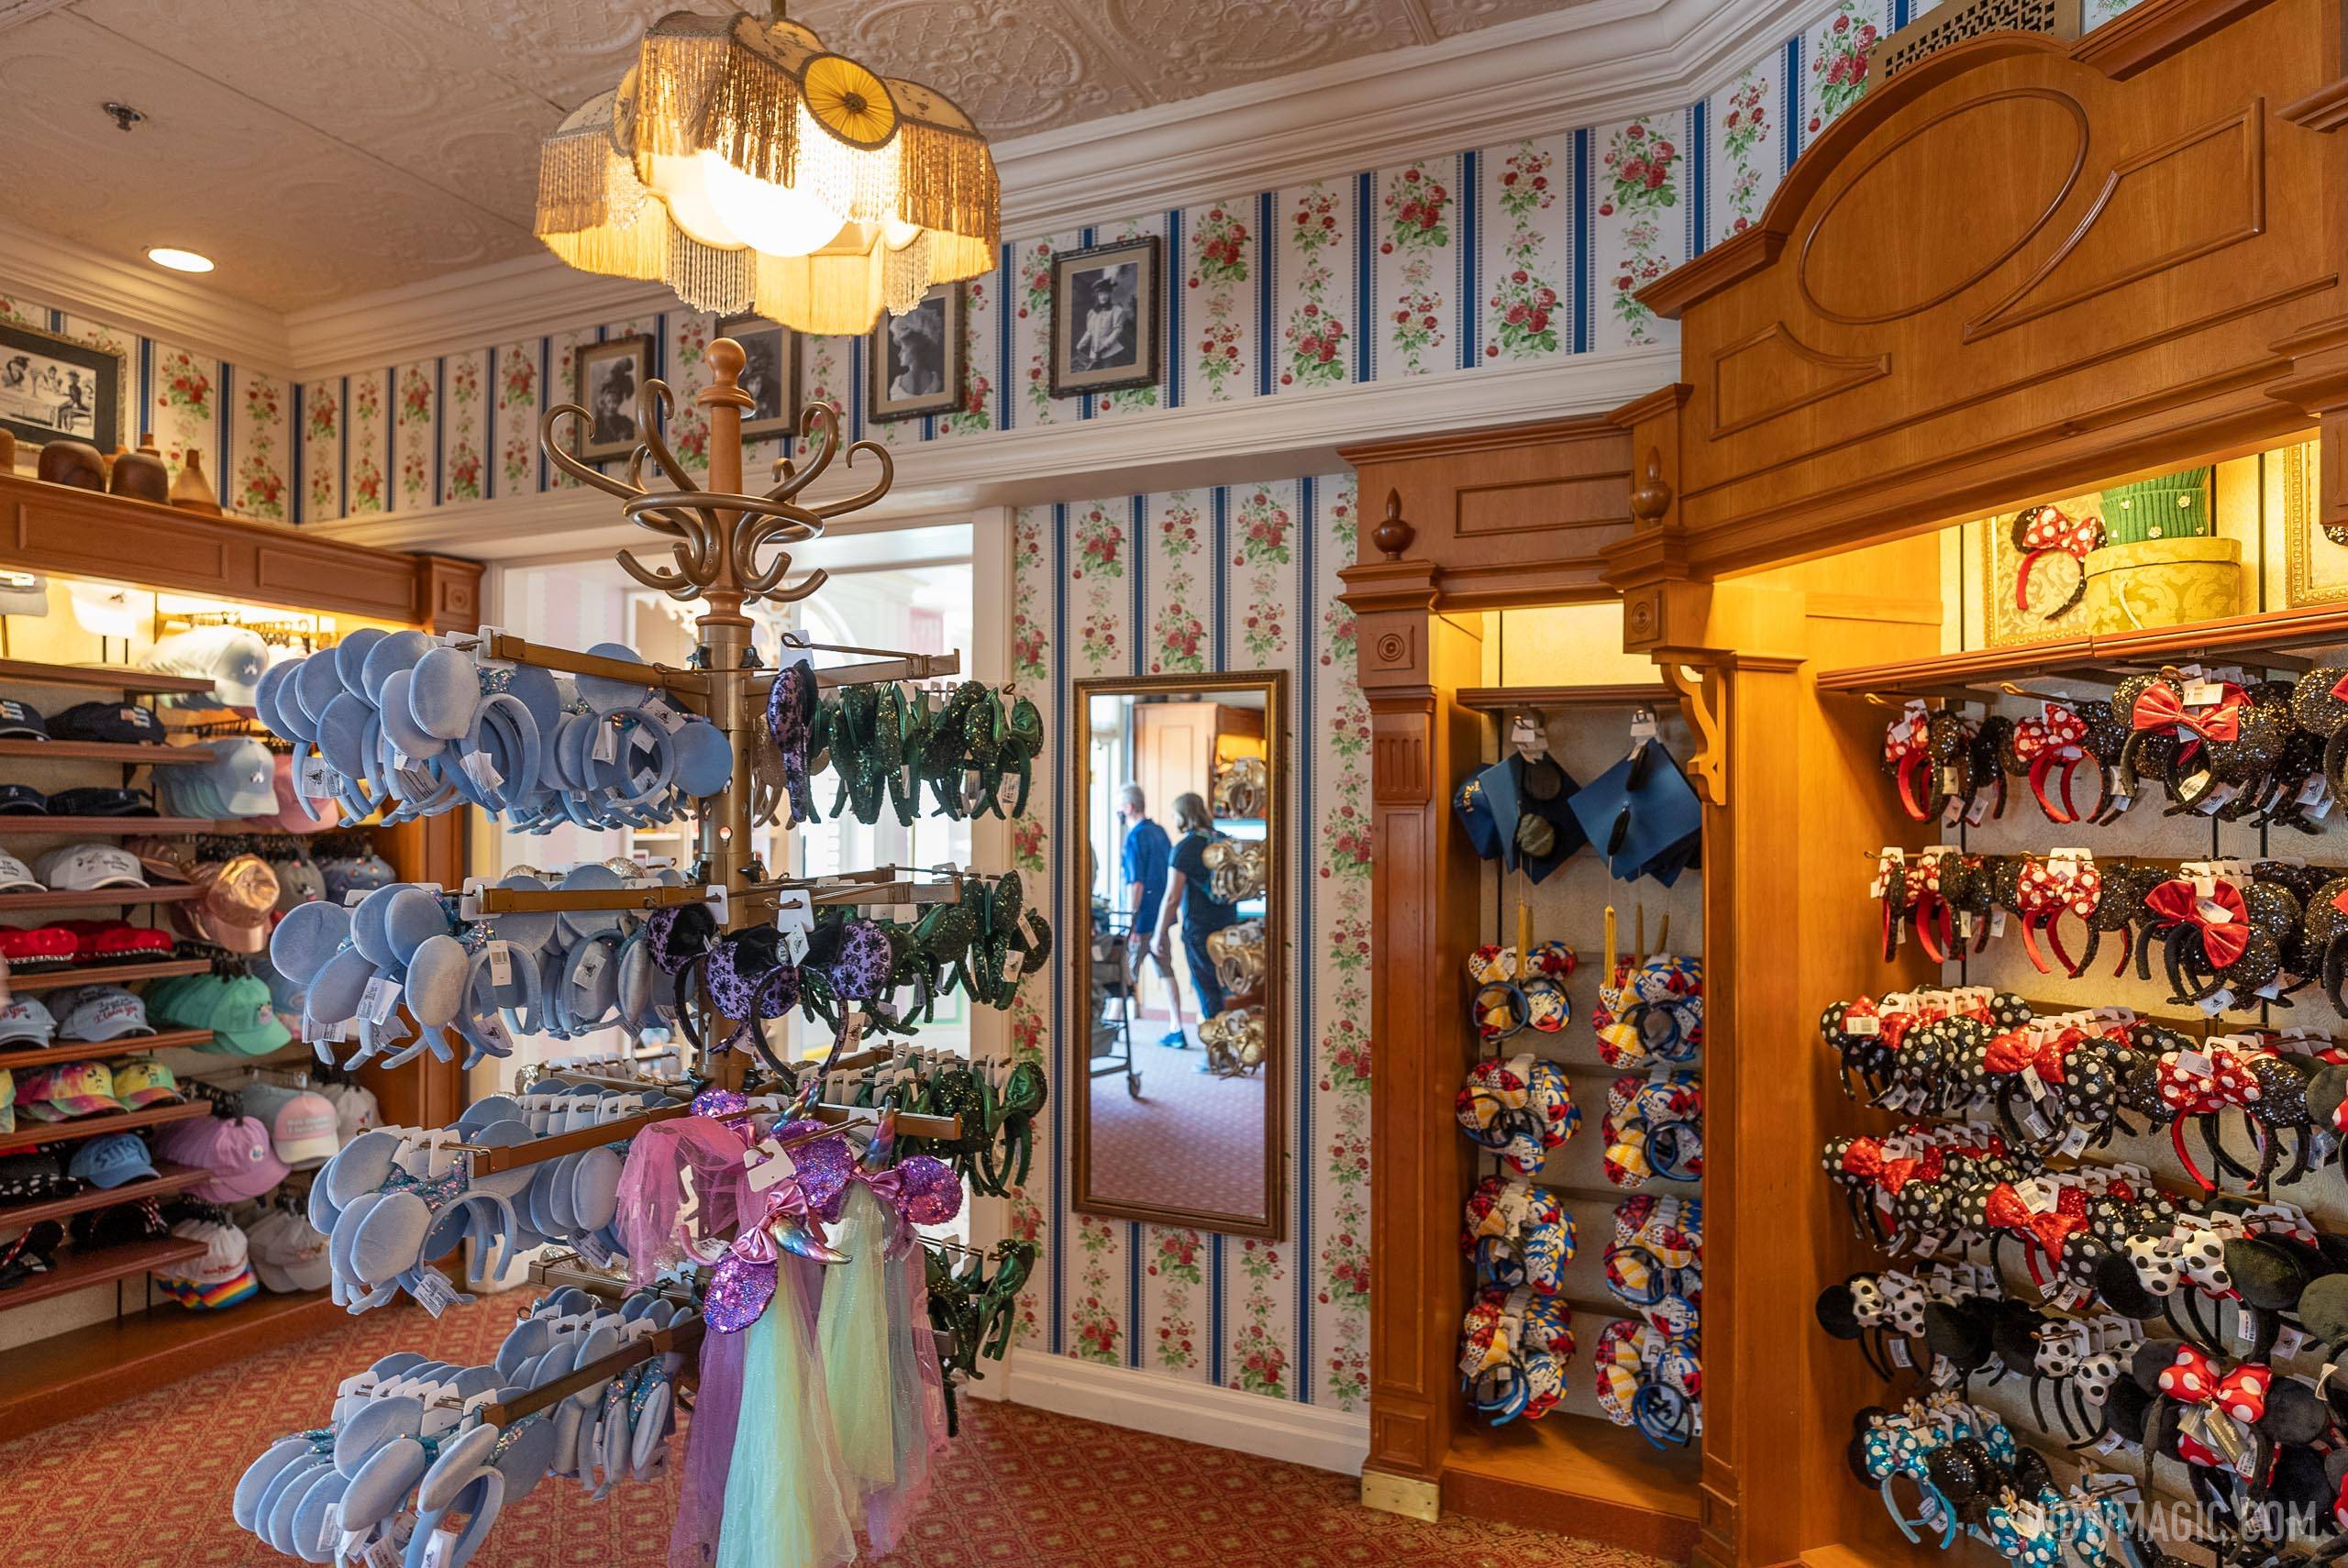 This area of The Chapeau is closest to Main Street Confectionery